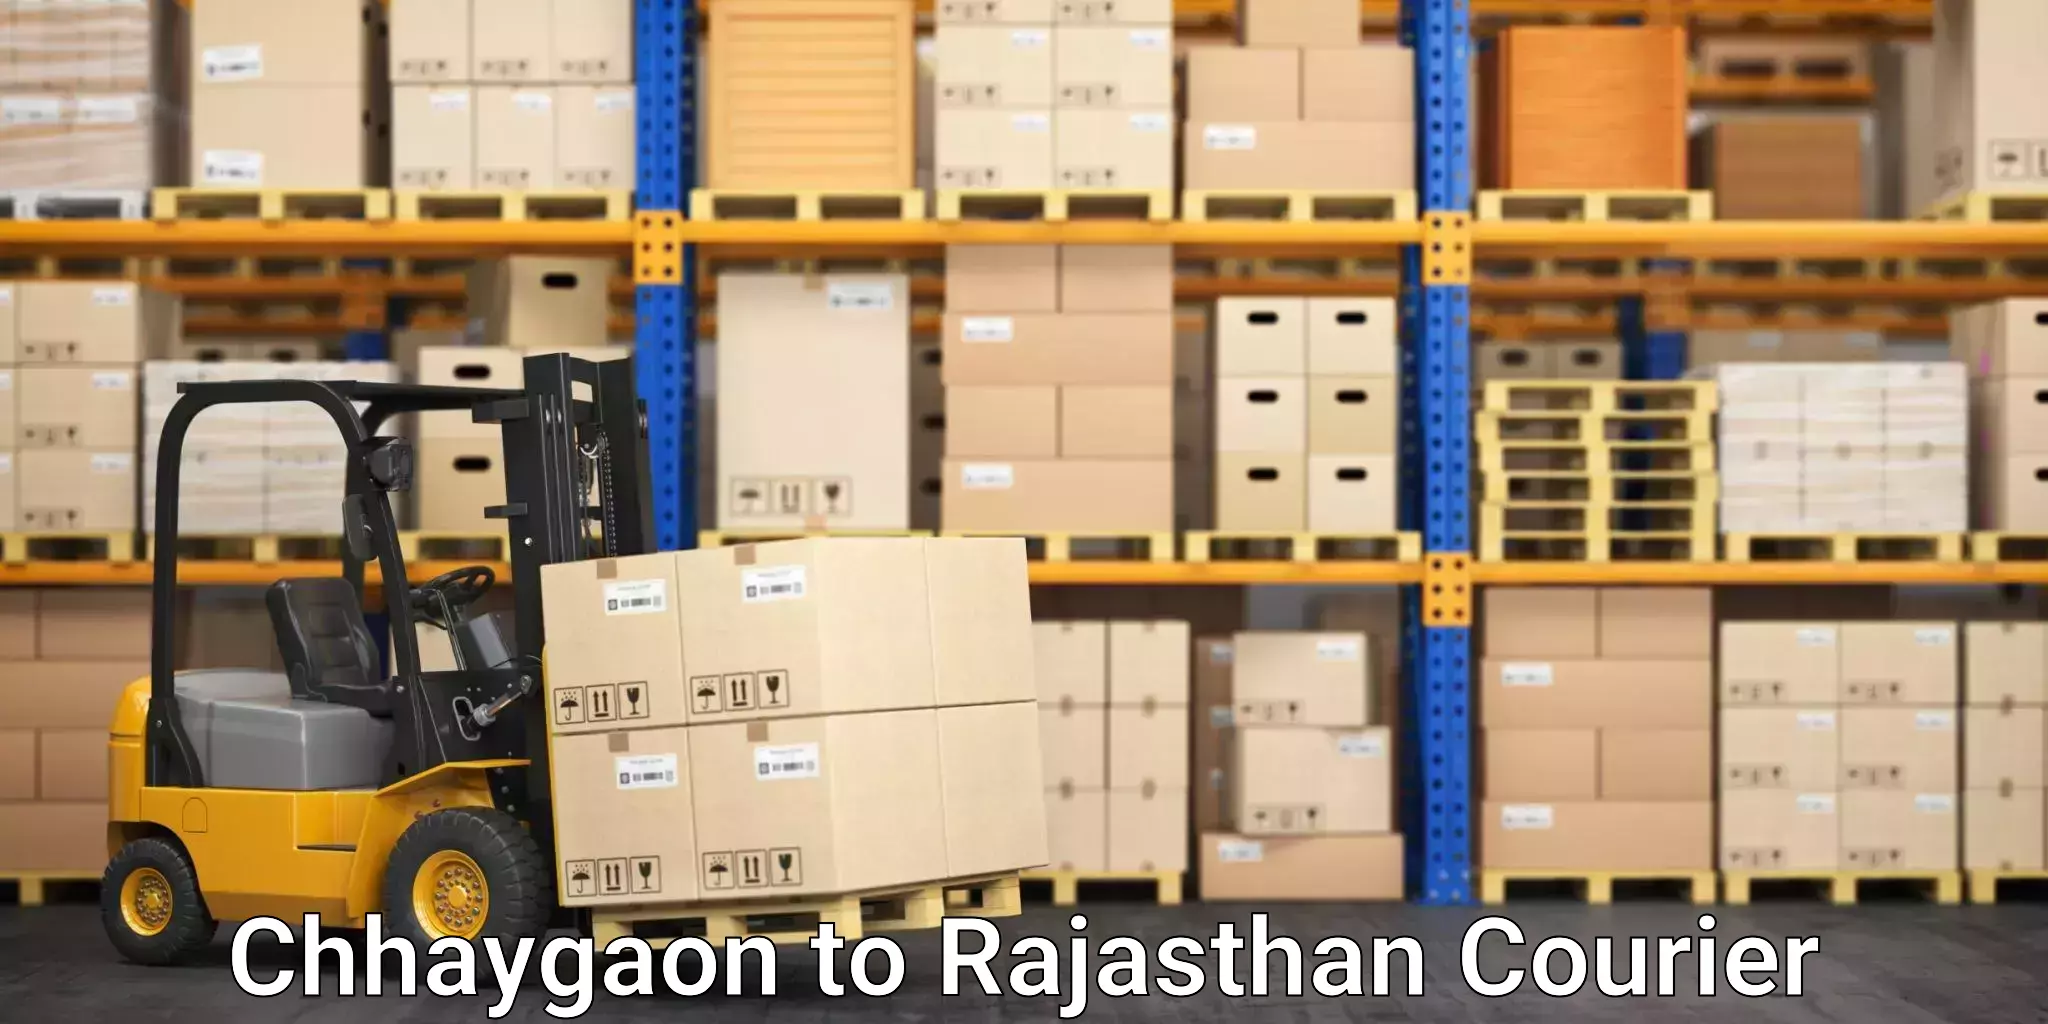 Cost-effective shipping solutions Chhaygaon to Rajasthan